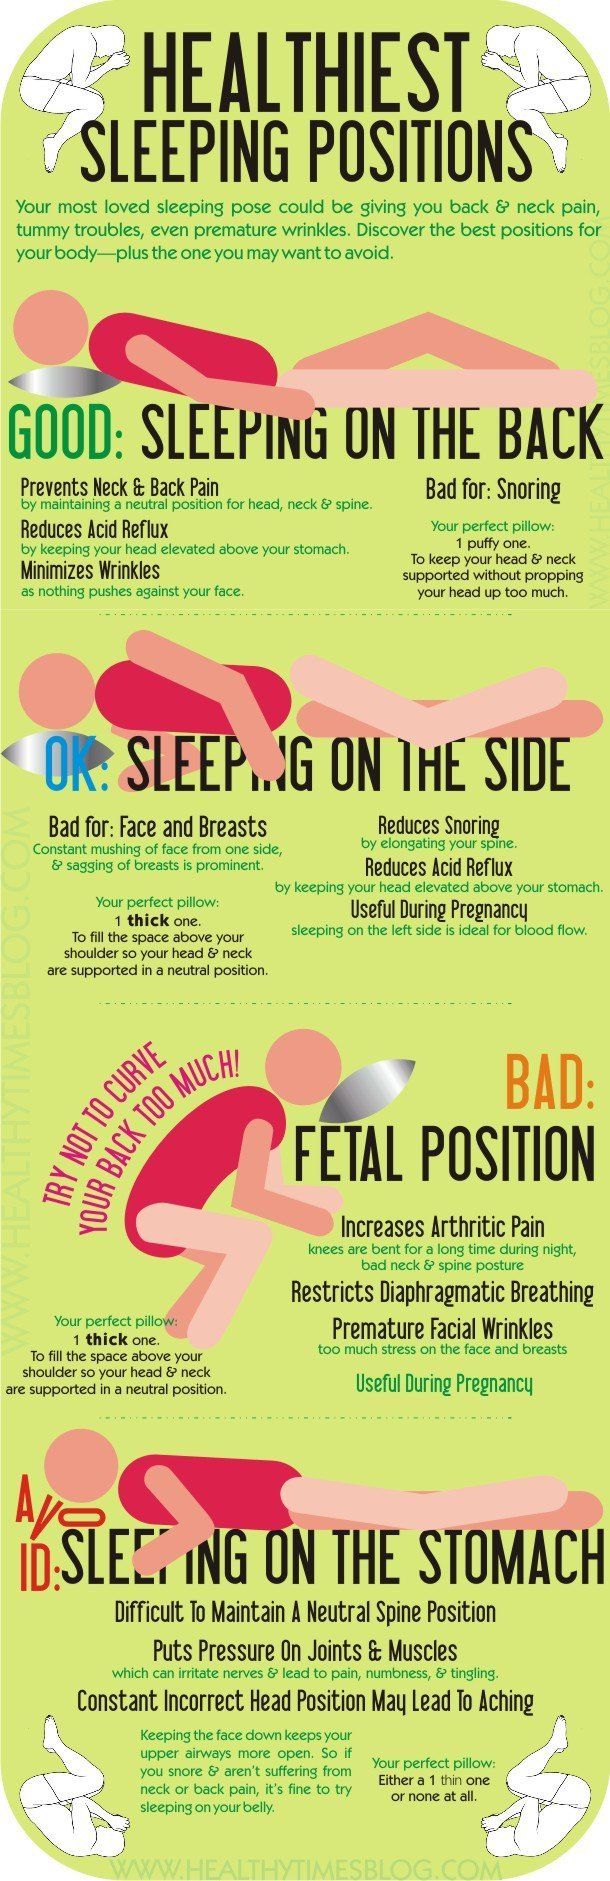 Sleep Positions for Less Low Back Pain - Athletico